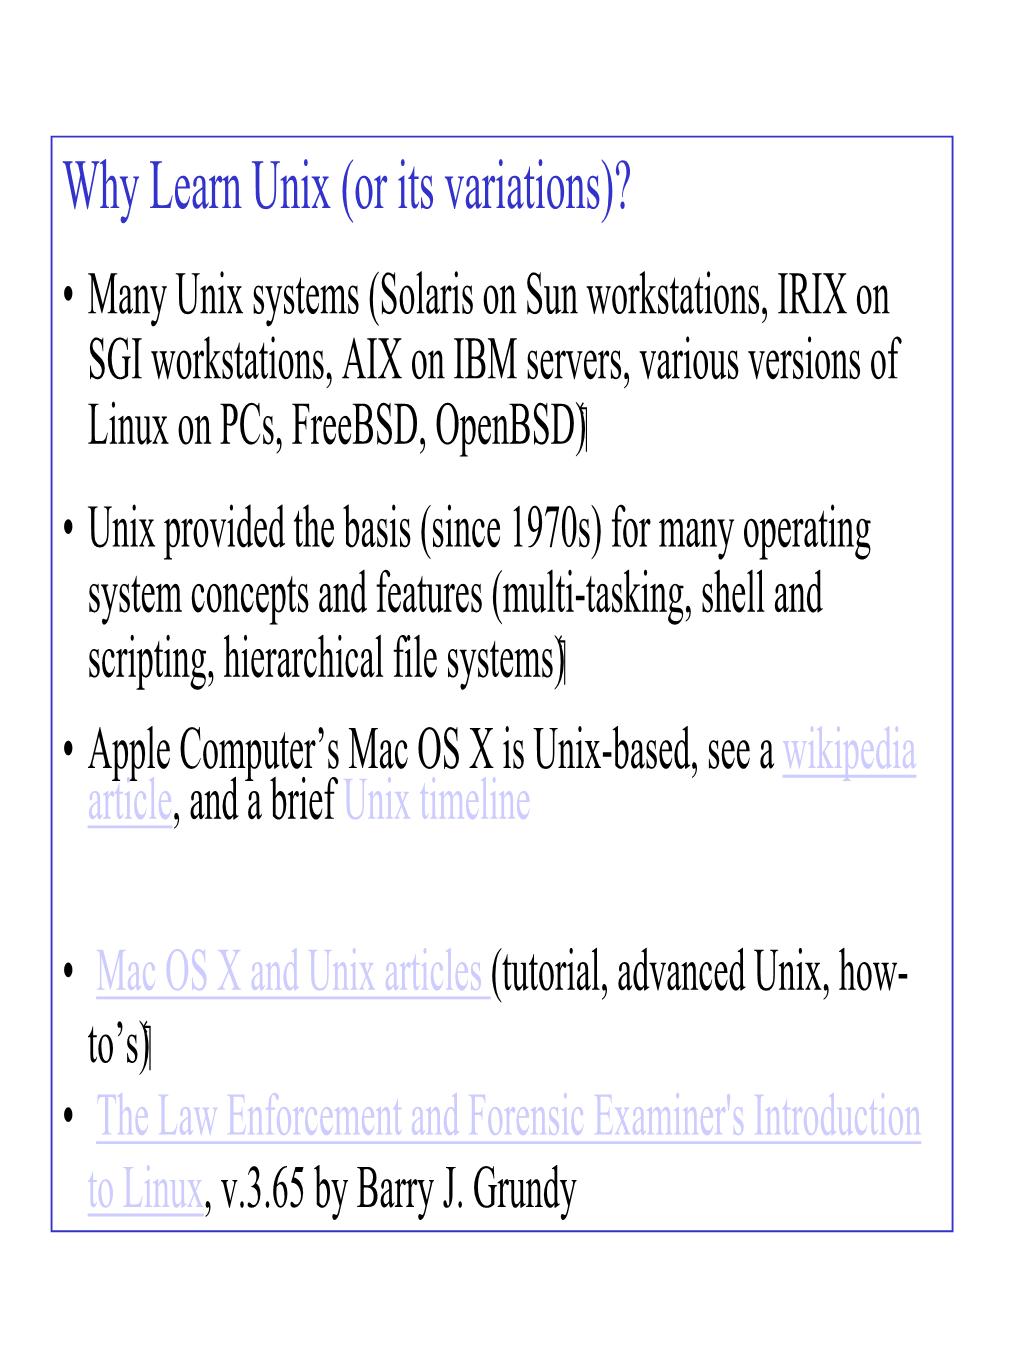 Why Learn Unix (Or Its Variations)? • Many Unix Systems (Solaris on Sun Workstations, IRIX on SGI Workstations, AIX on IBM Servers, Various Versions Of